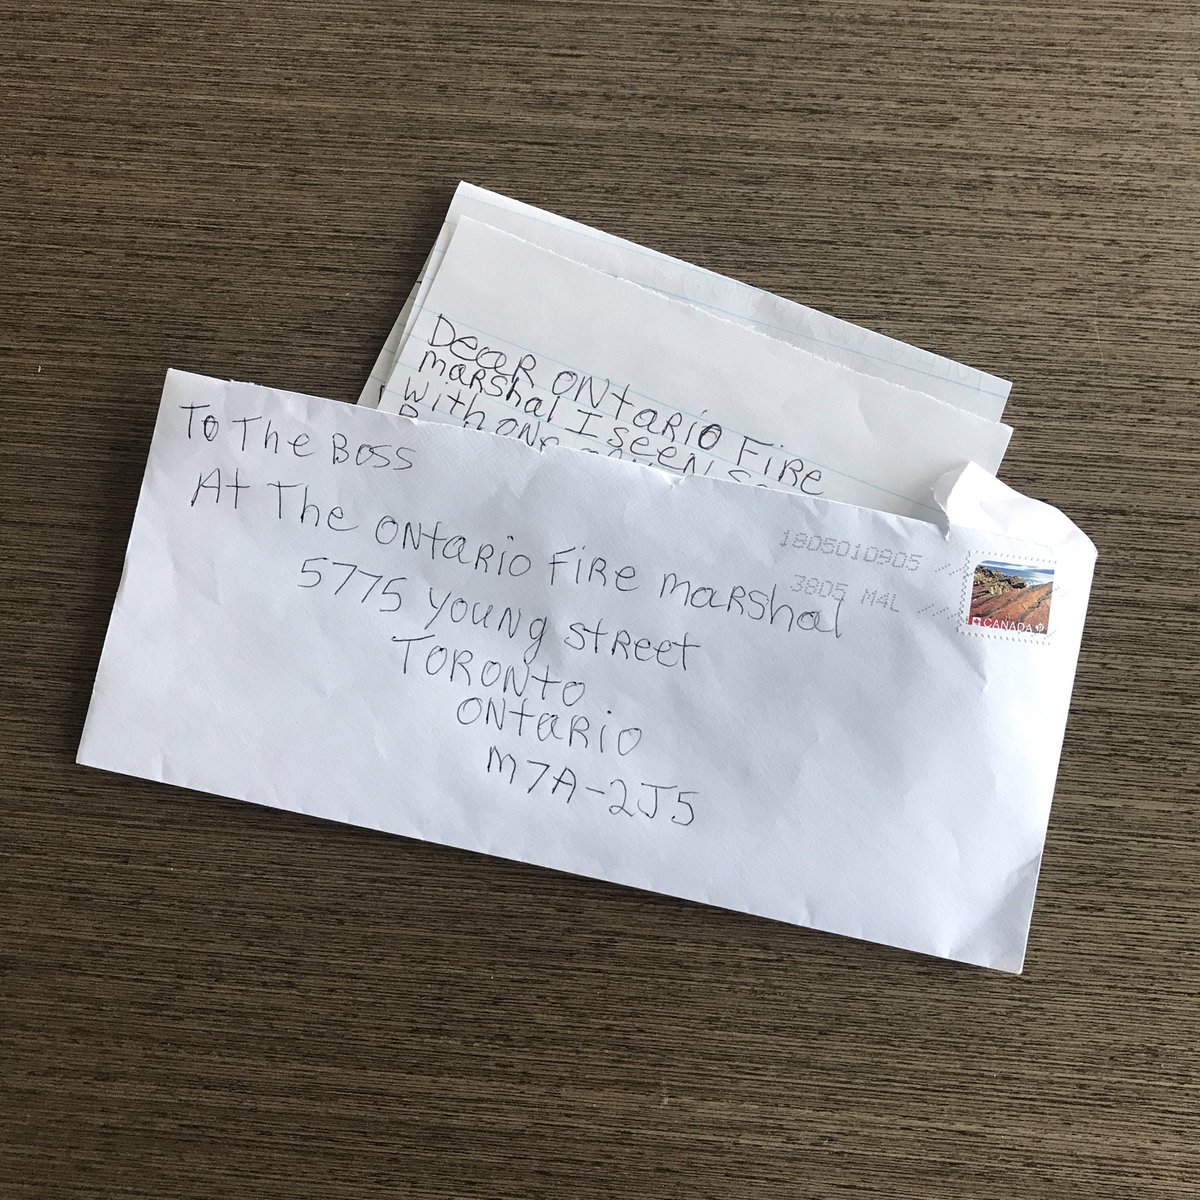 Ross Nichols on Twitter: "No actual recipient name, the wrong